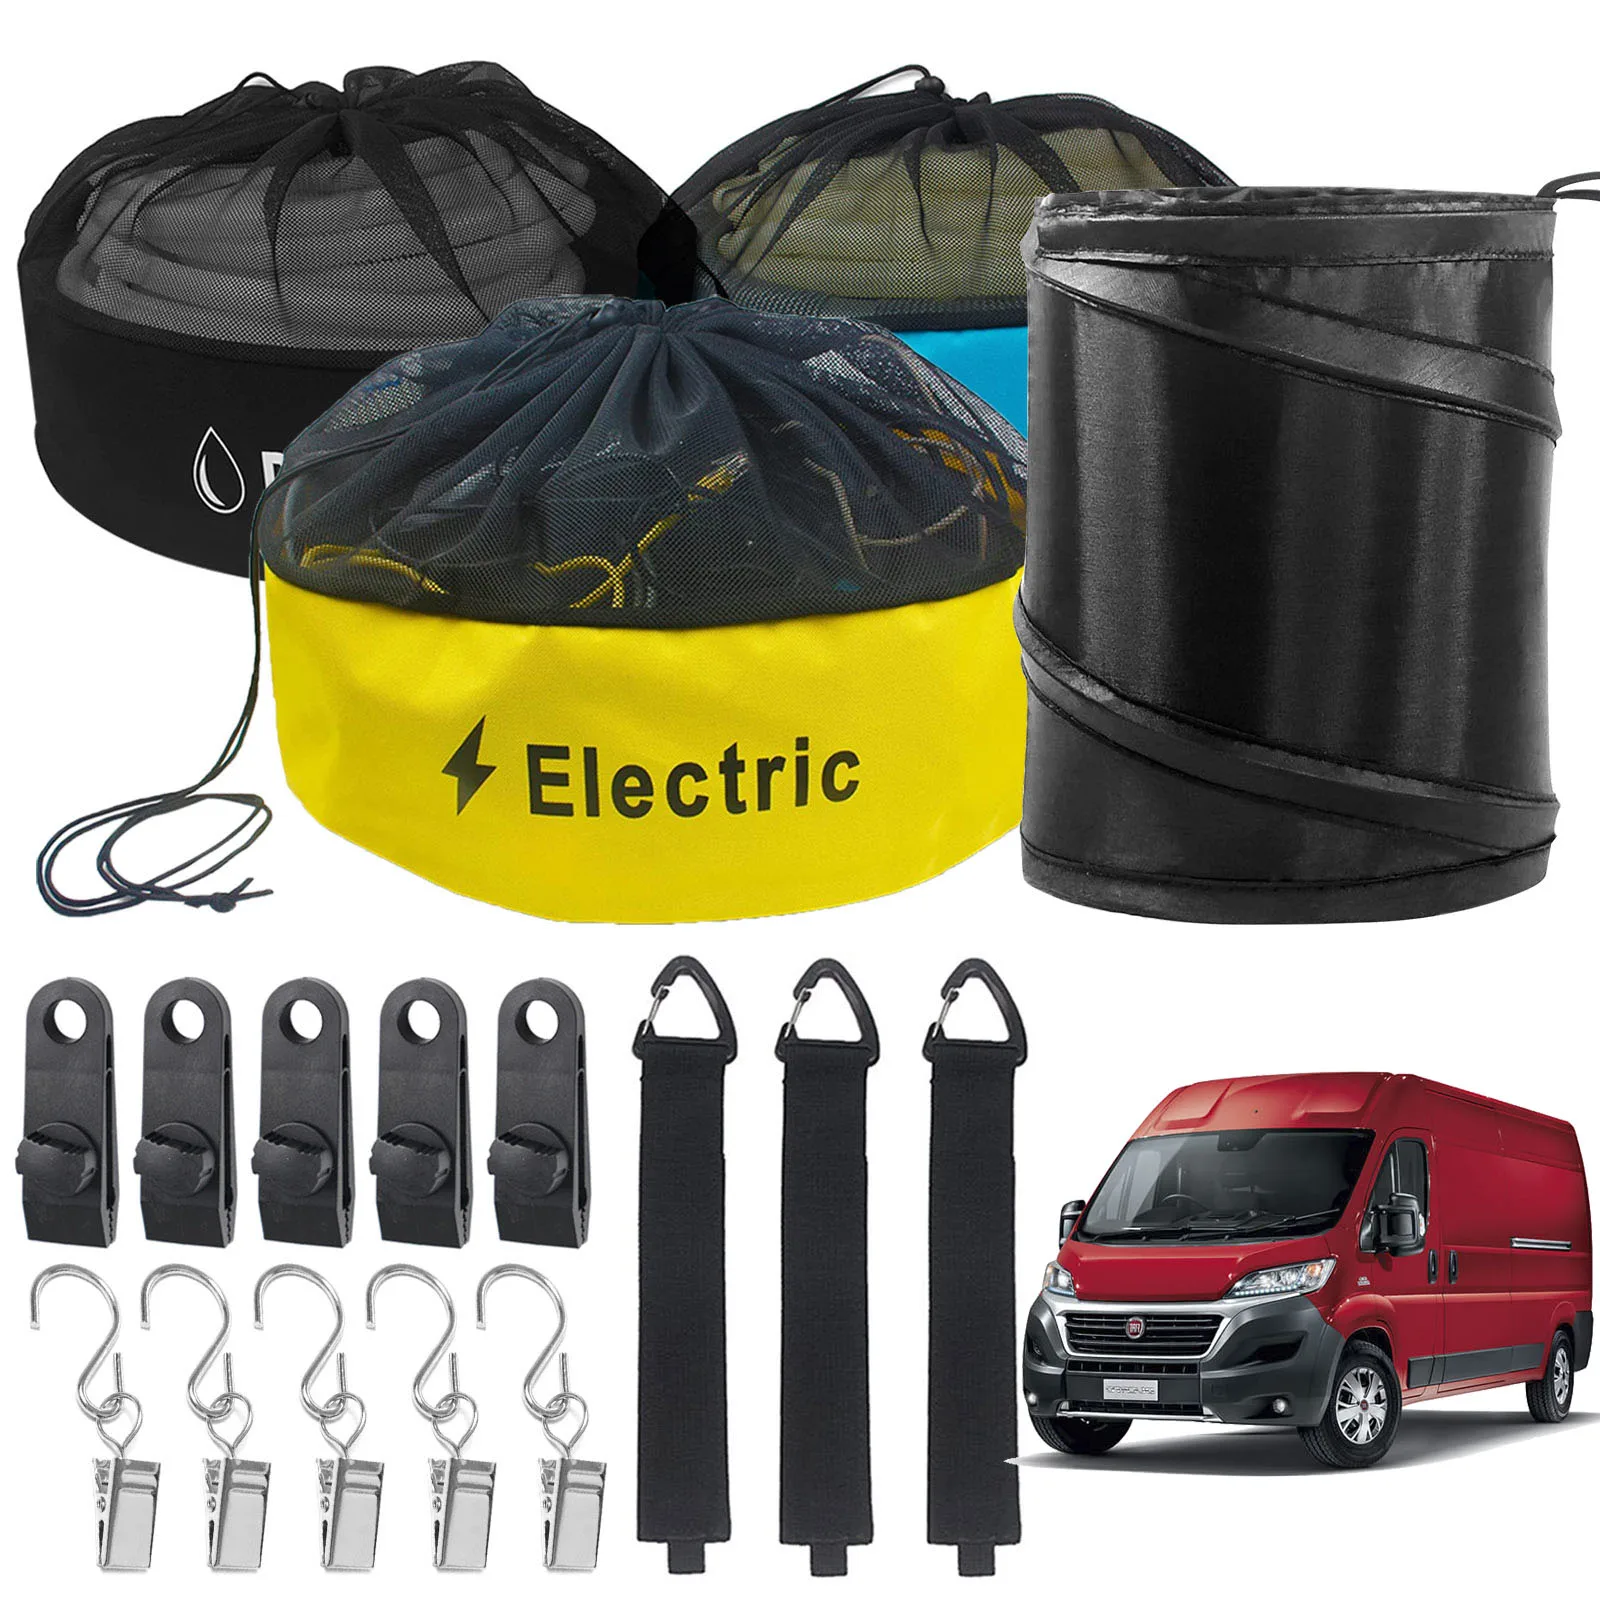 RV Hose Bags for Fiat Ducato 244 250 290 Camper Storage Sewer Fresh/Black Water Electrical Trash Can Motorhome Cleaning Tool Kit